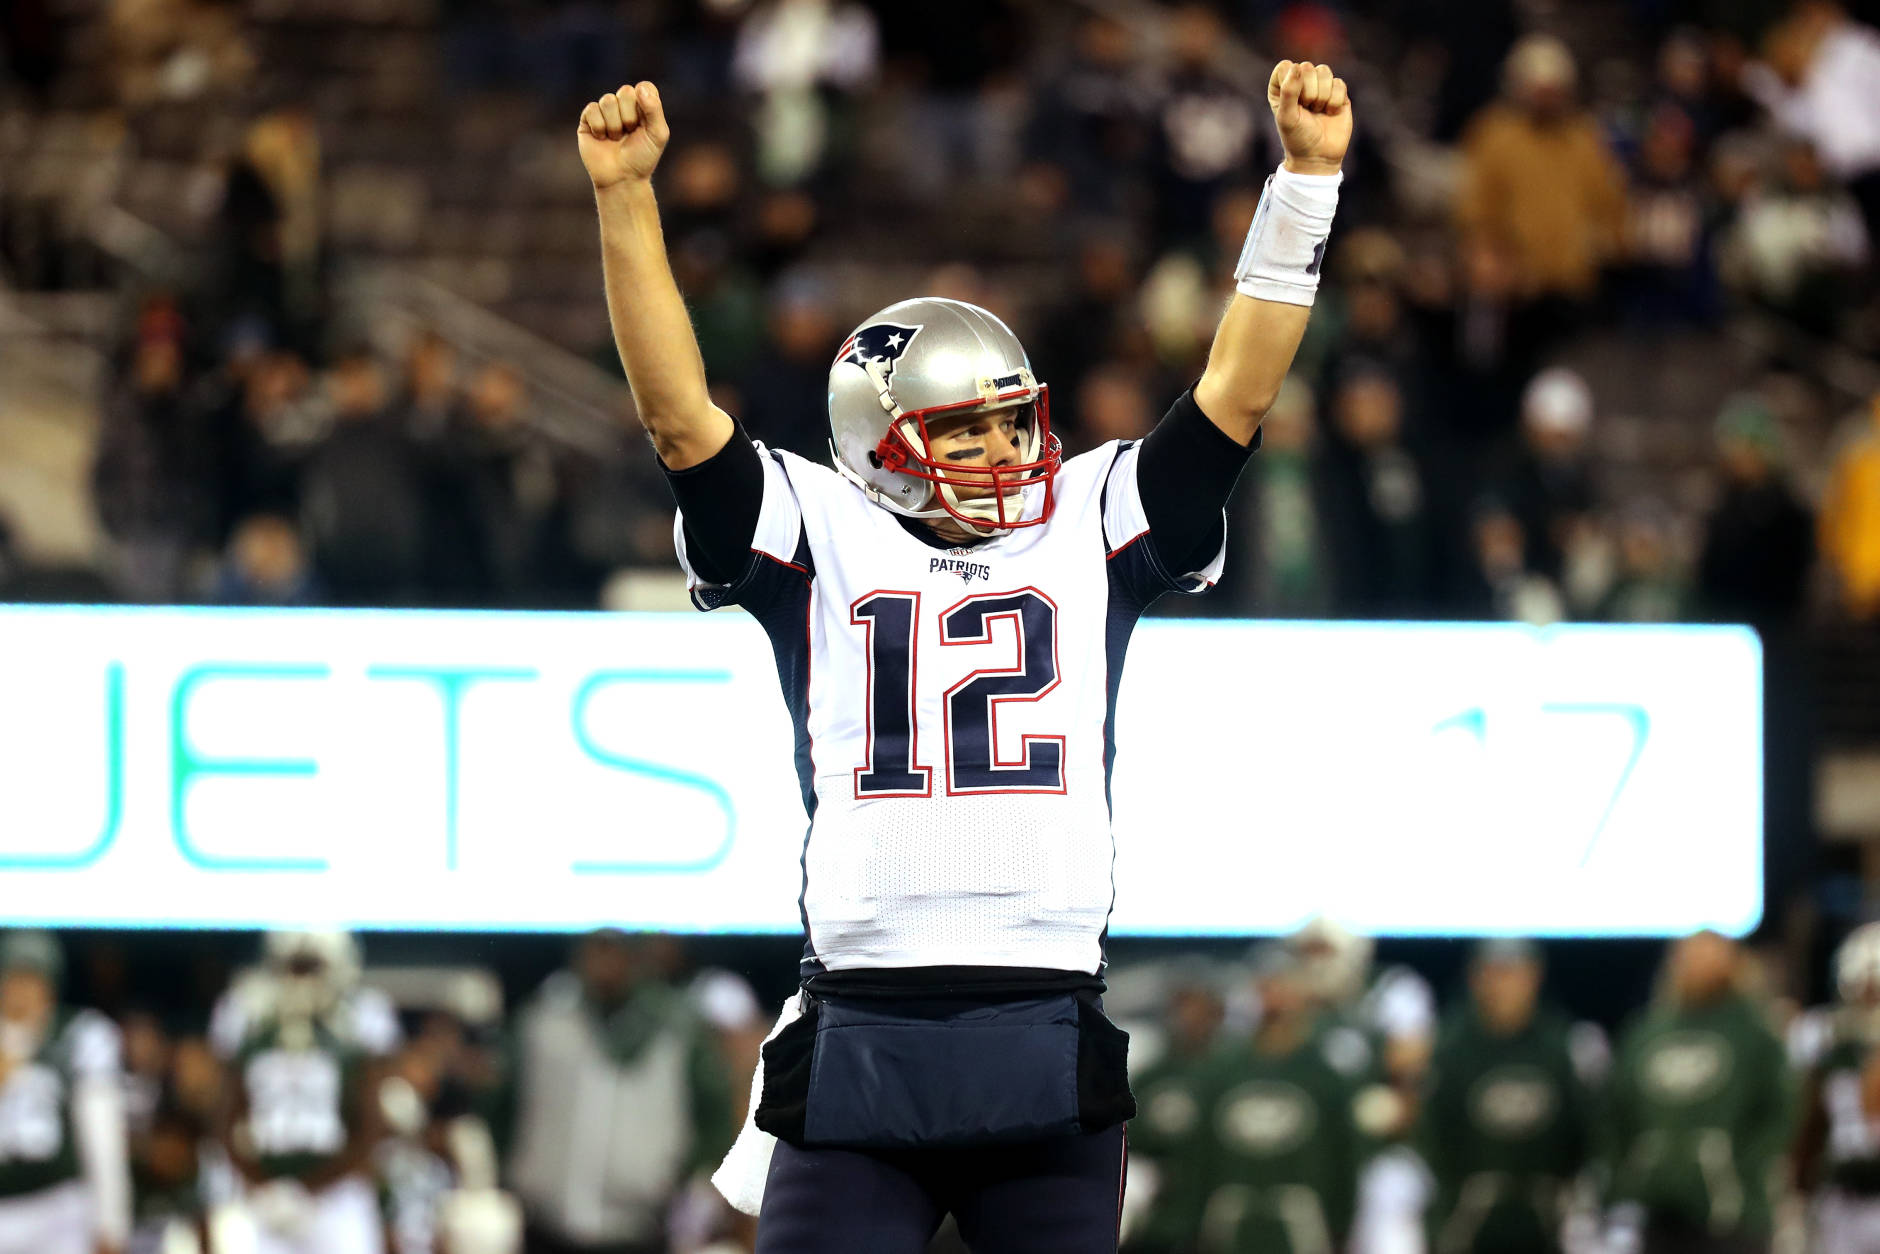 EAST RUTHERFORD, NJ - NOVEMBER 27:  Tom Brady #12 of the New England Patriots celebrates against the New York Jets during the fourth quarter in the game at MetLife Stadium on November 27, 2016 in East Rutherford, New Jersey.  (Photo by Michael Reaves/Getty Images)